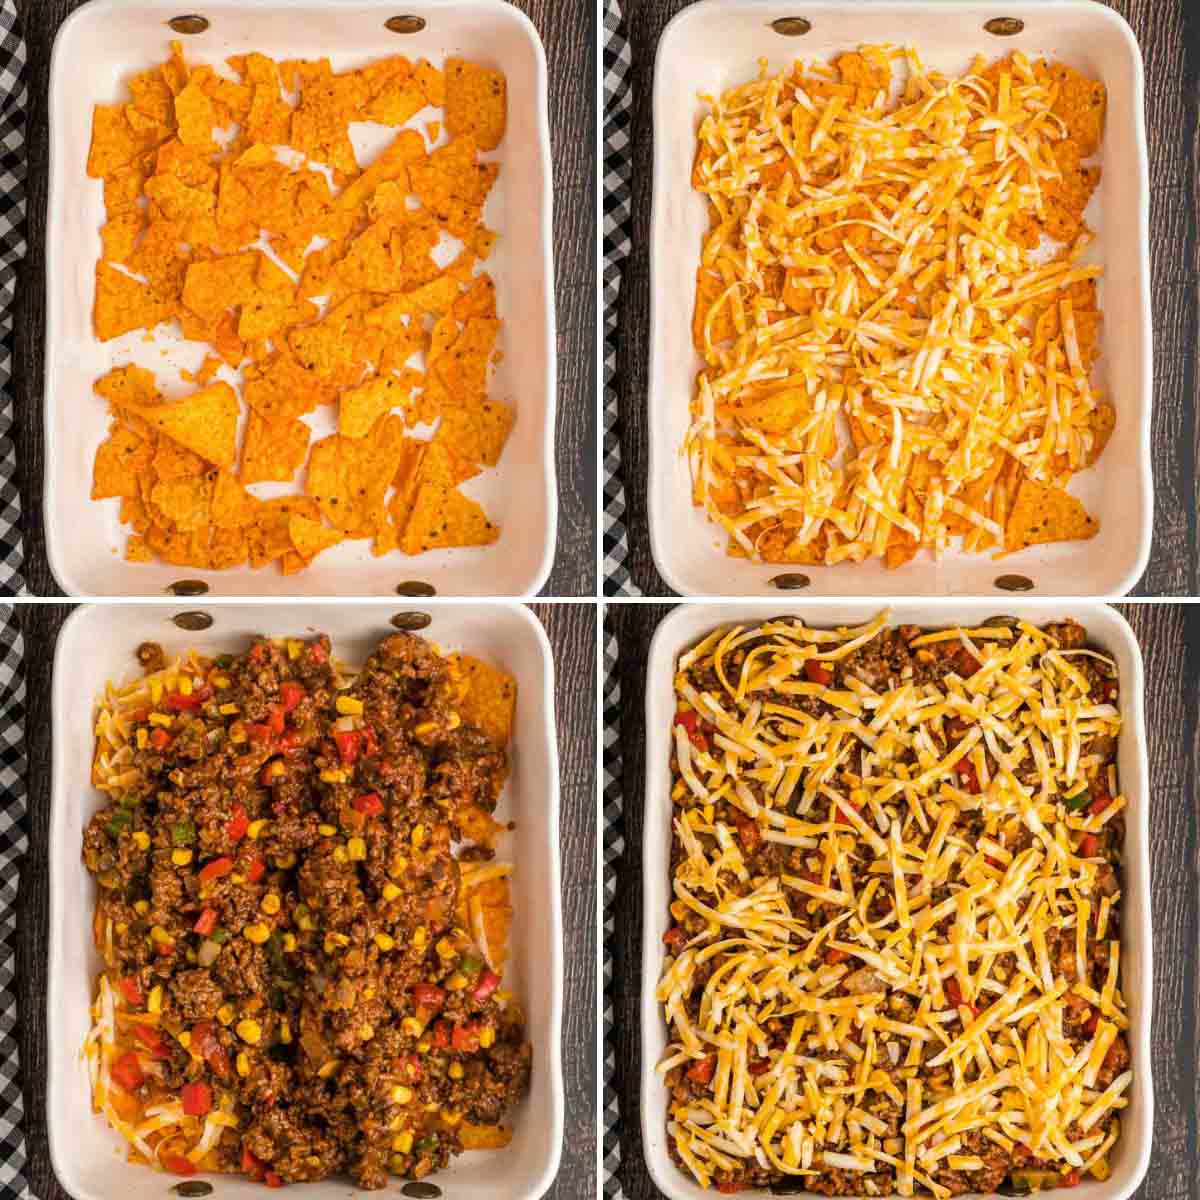 Step by step photos of assembling doritos, cheese, and ground beef in a baking dish.